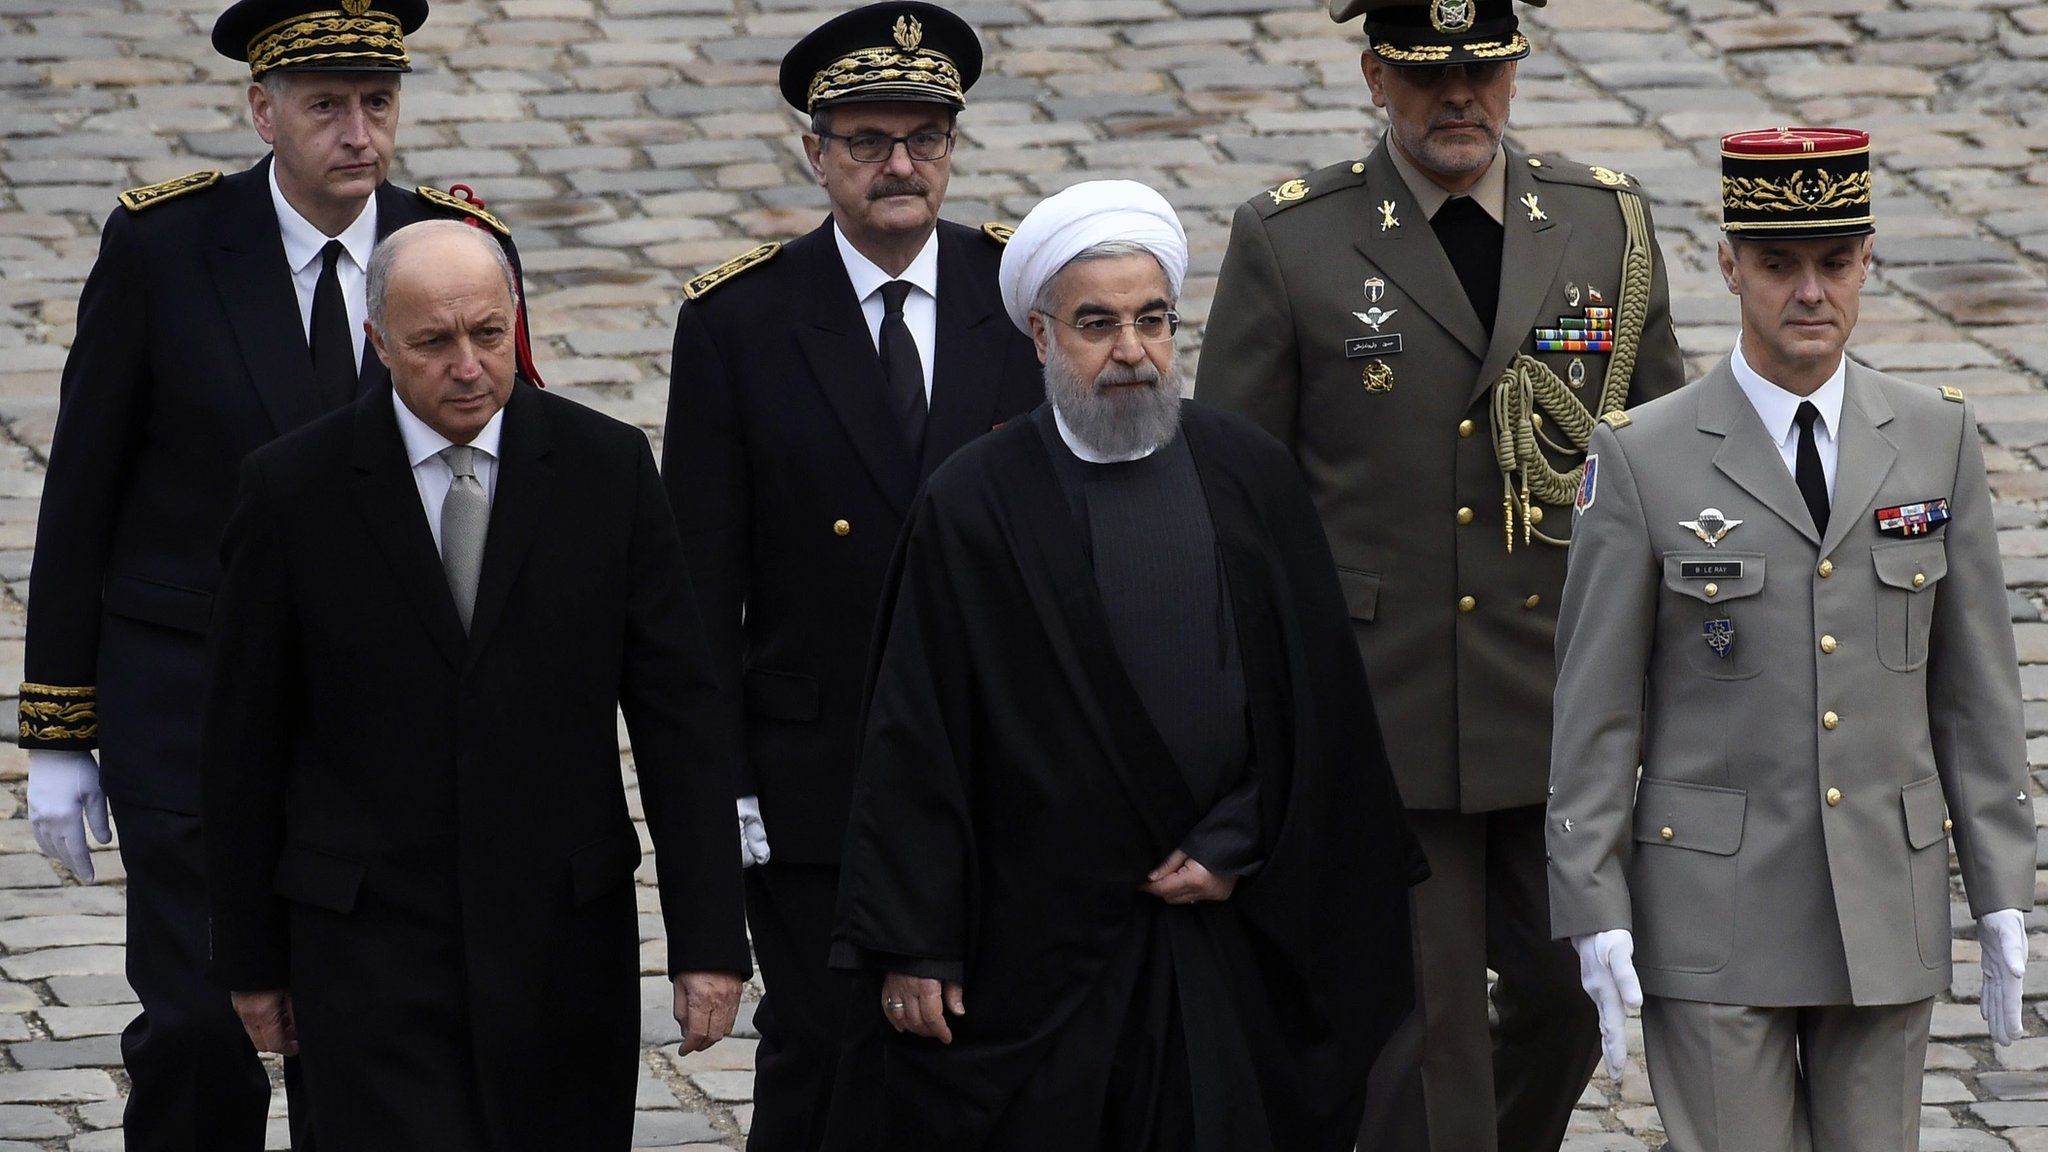 French Foreign Minister Laurent Fabius (2nd L) greets Iranian President Hassan Rouhani (C) during a welcoming ceremony on January 28, 2016 at the Invalides in Paris